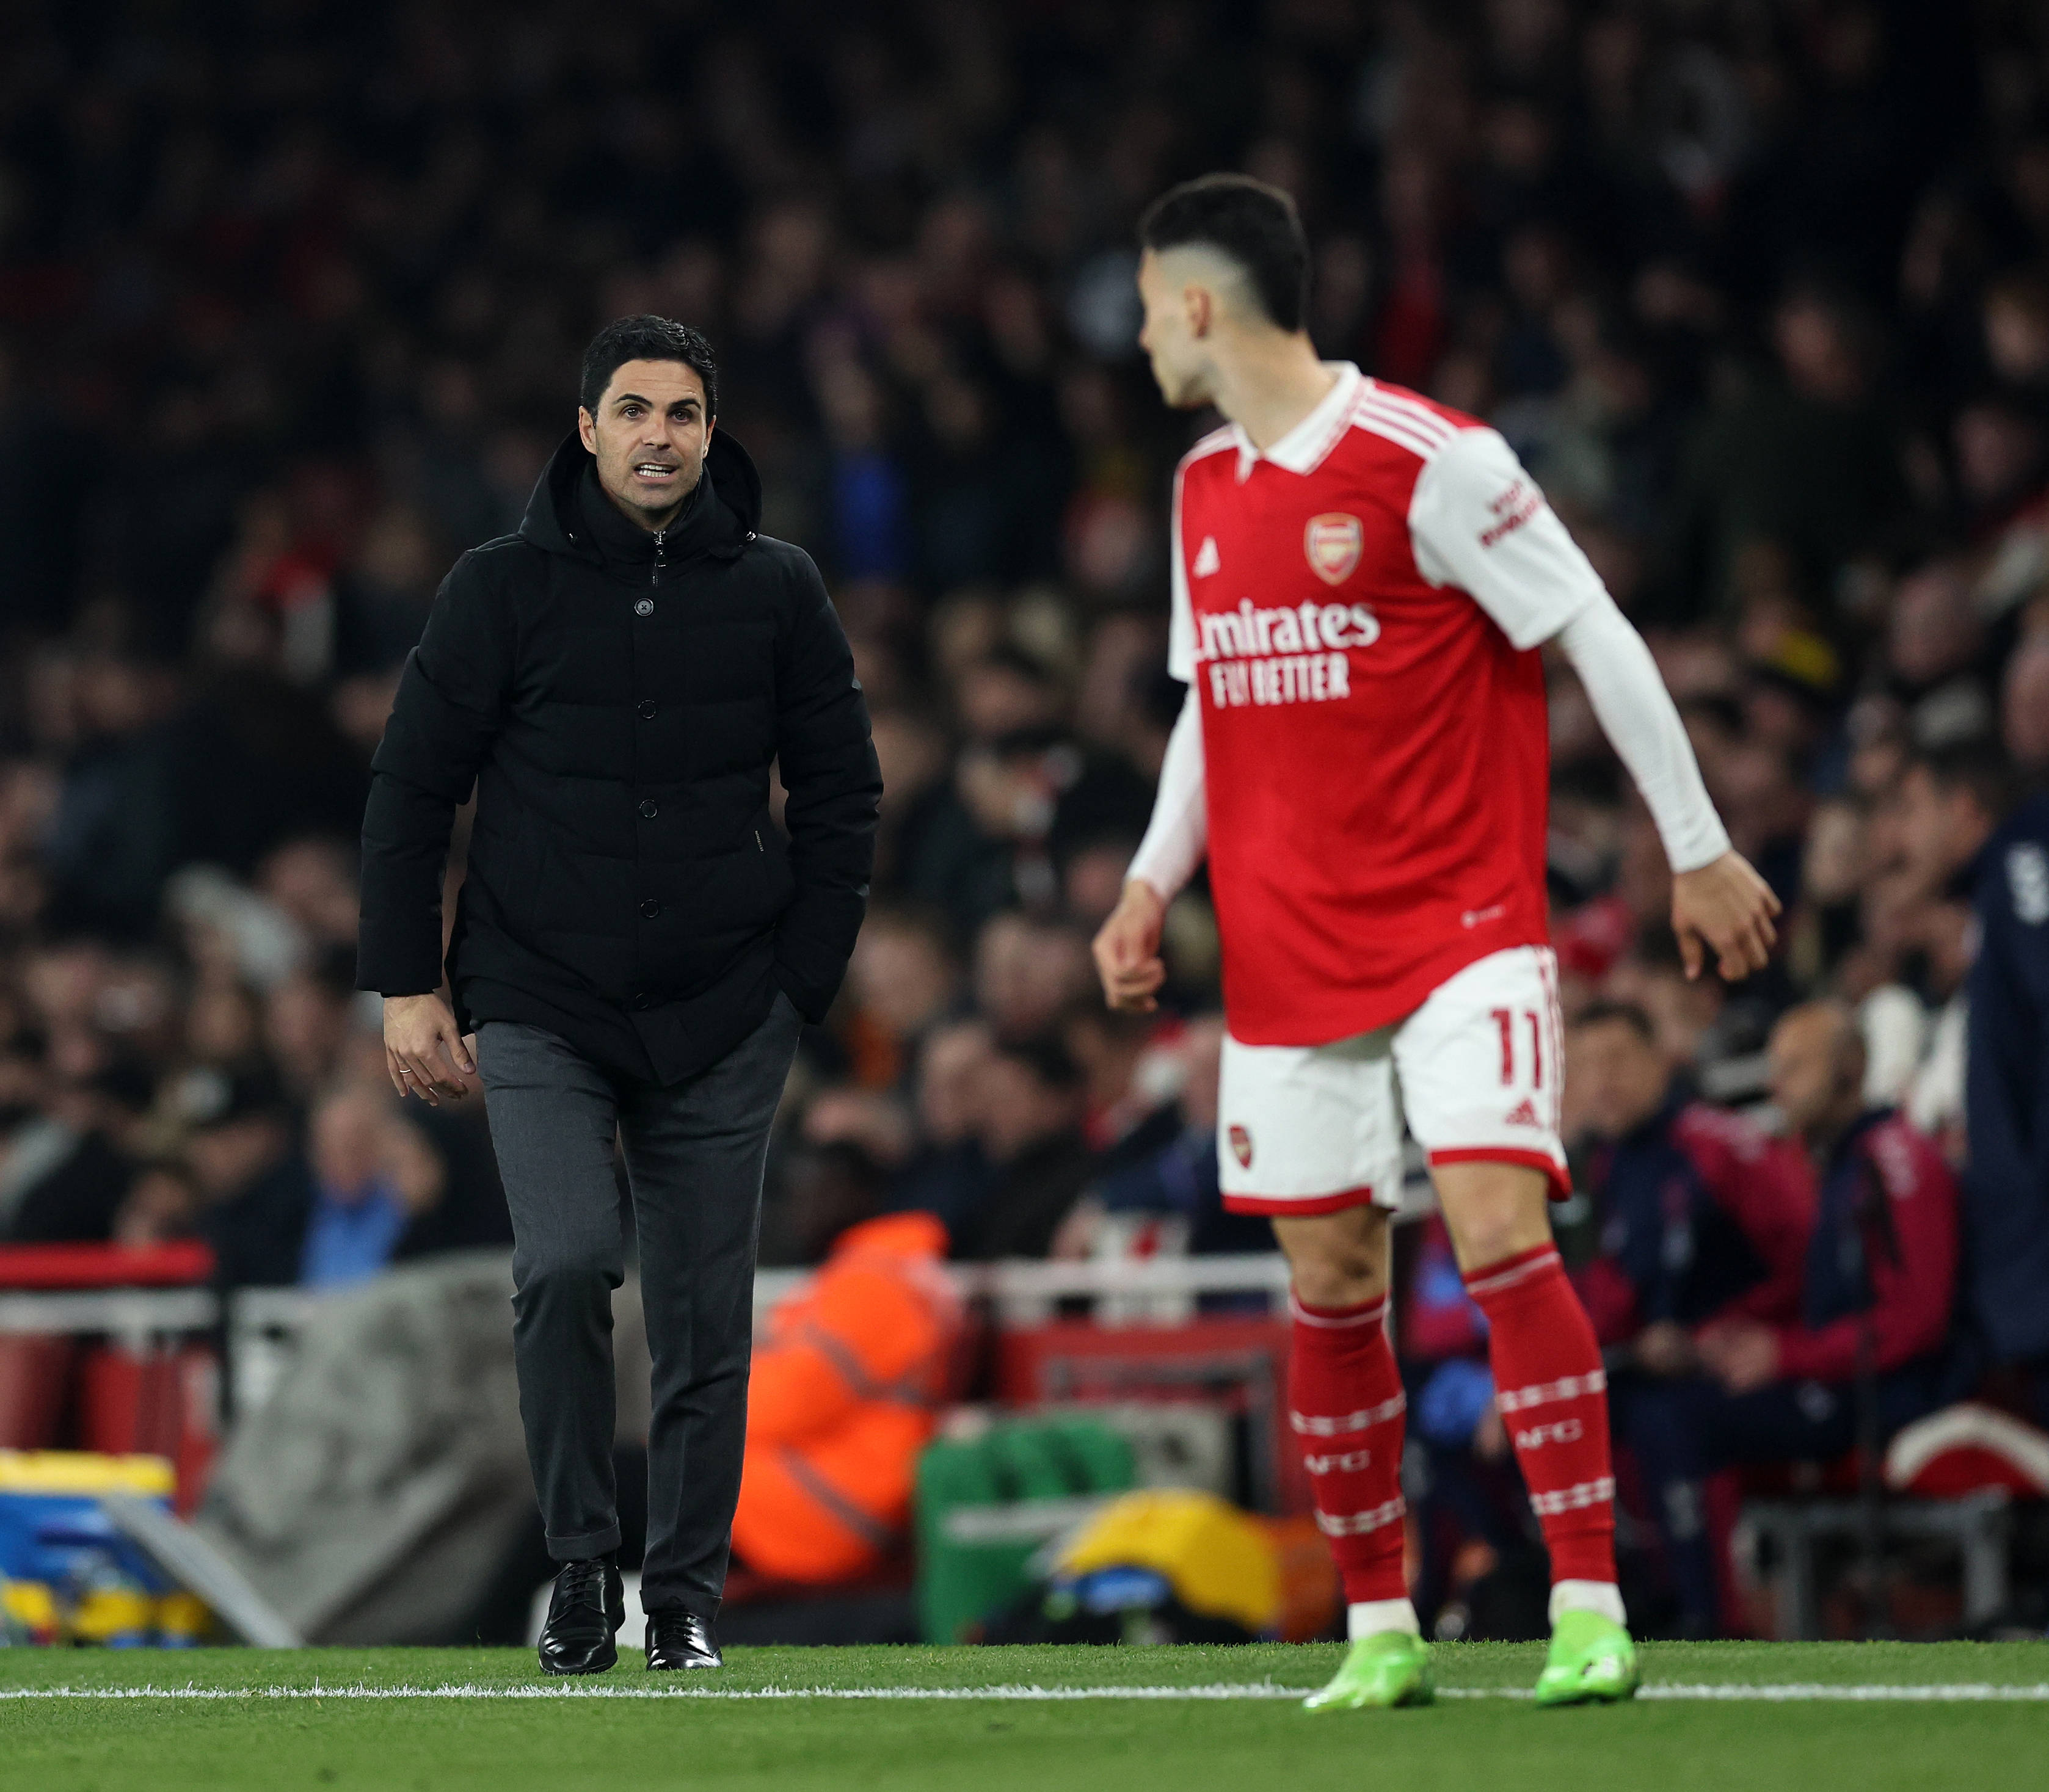 Mikel Arteta manager of Arsenal speaks to Gabriel Martinelli of Arsenal during the Premier League match at the Emirates Stadium